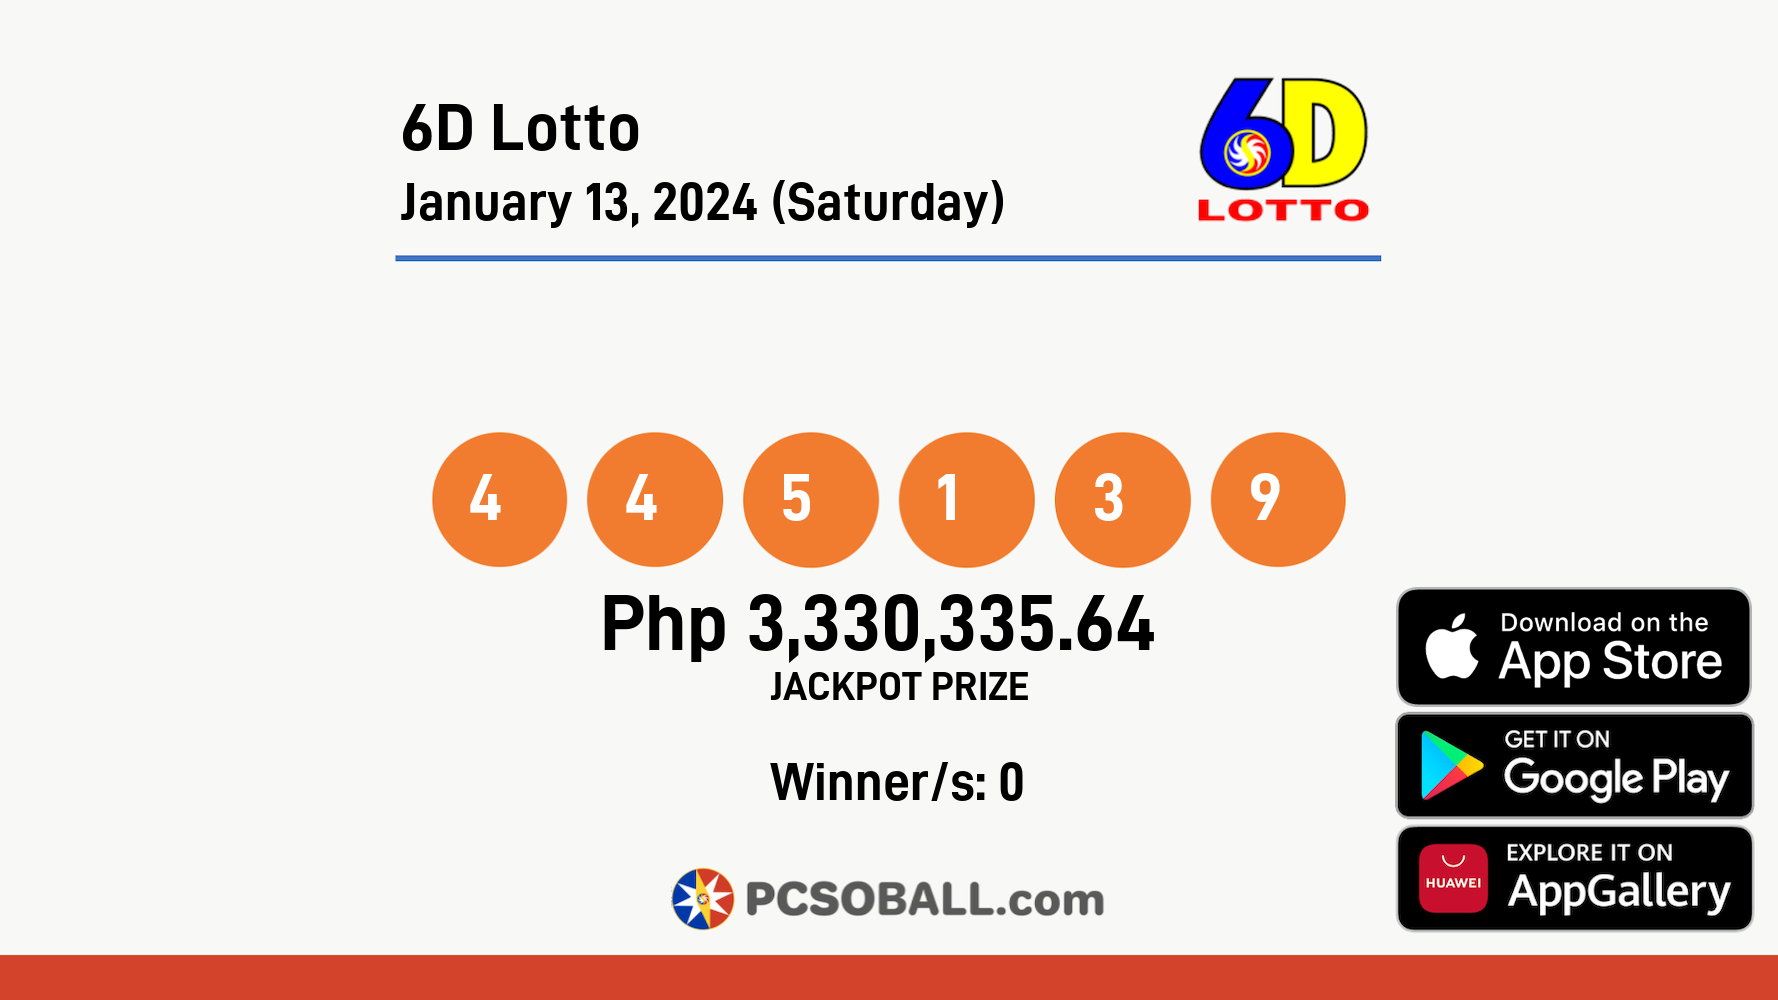 6D Lotto January 13, 2024 (Saturday) Result